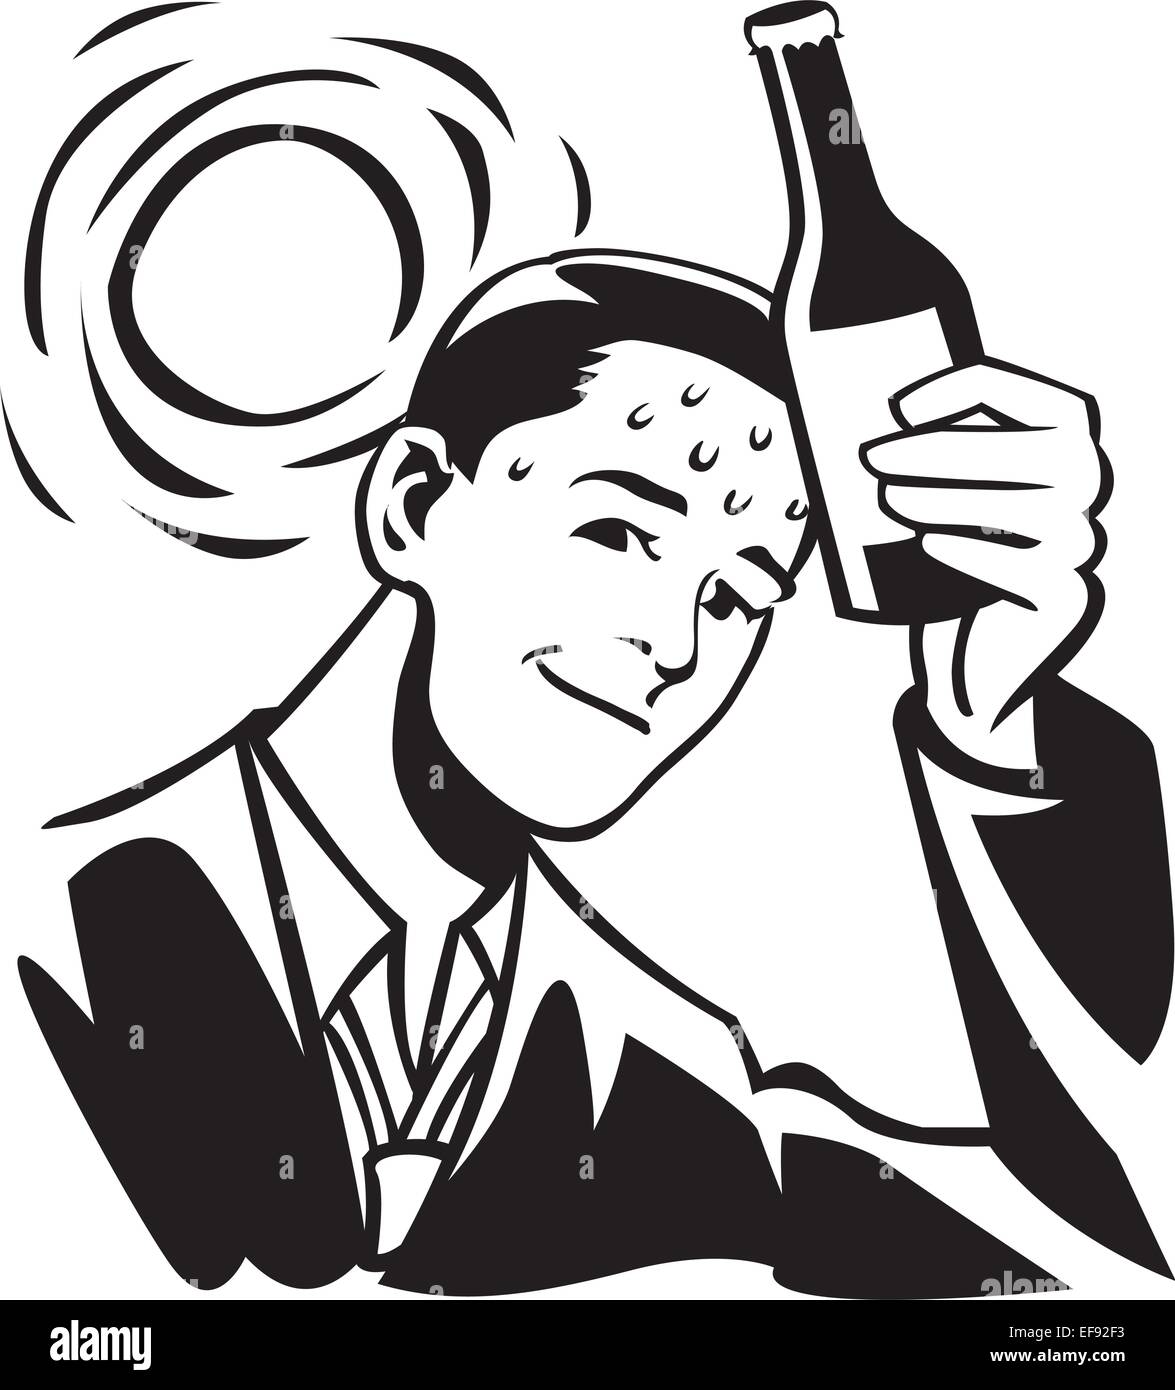 A young man cooling off with a cold bottle on his forehead Stock Vector